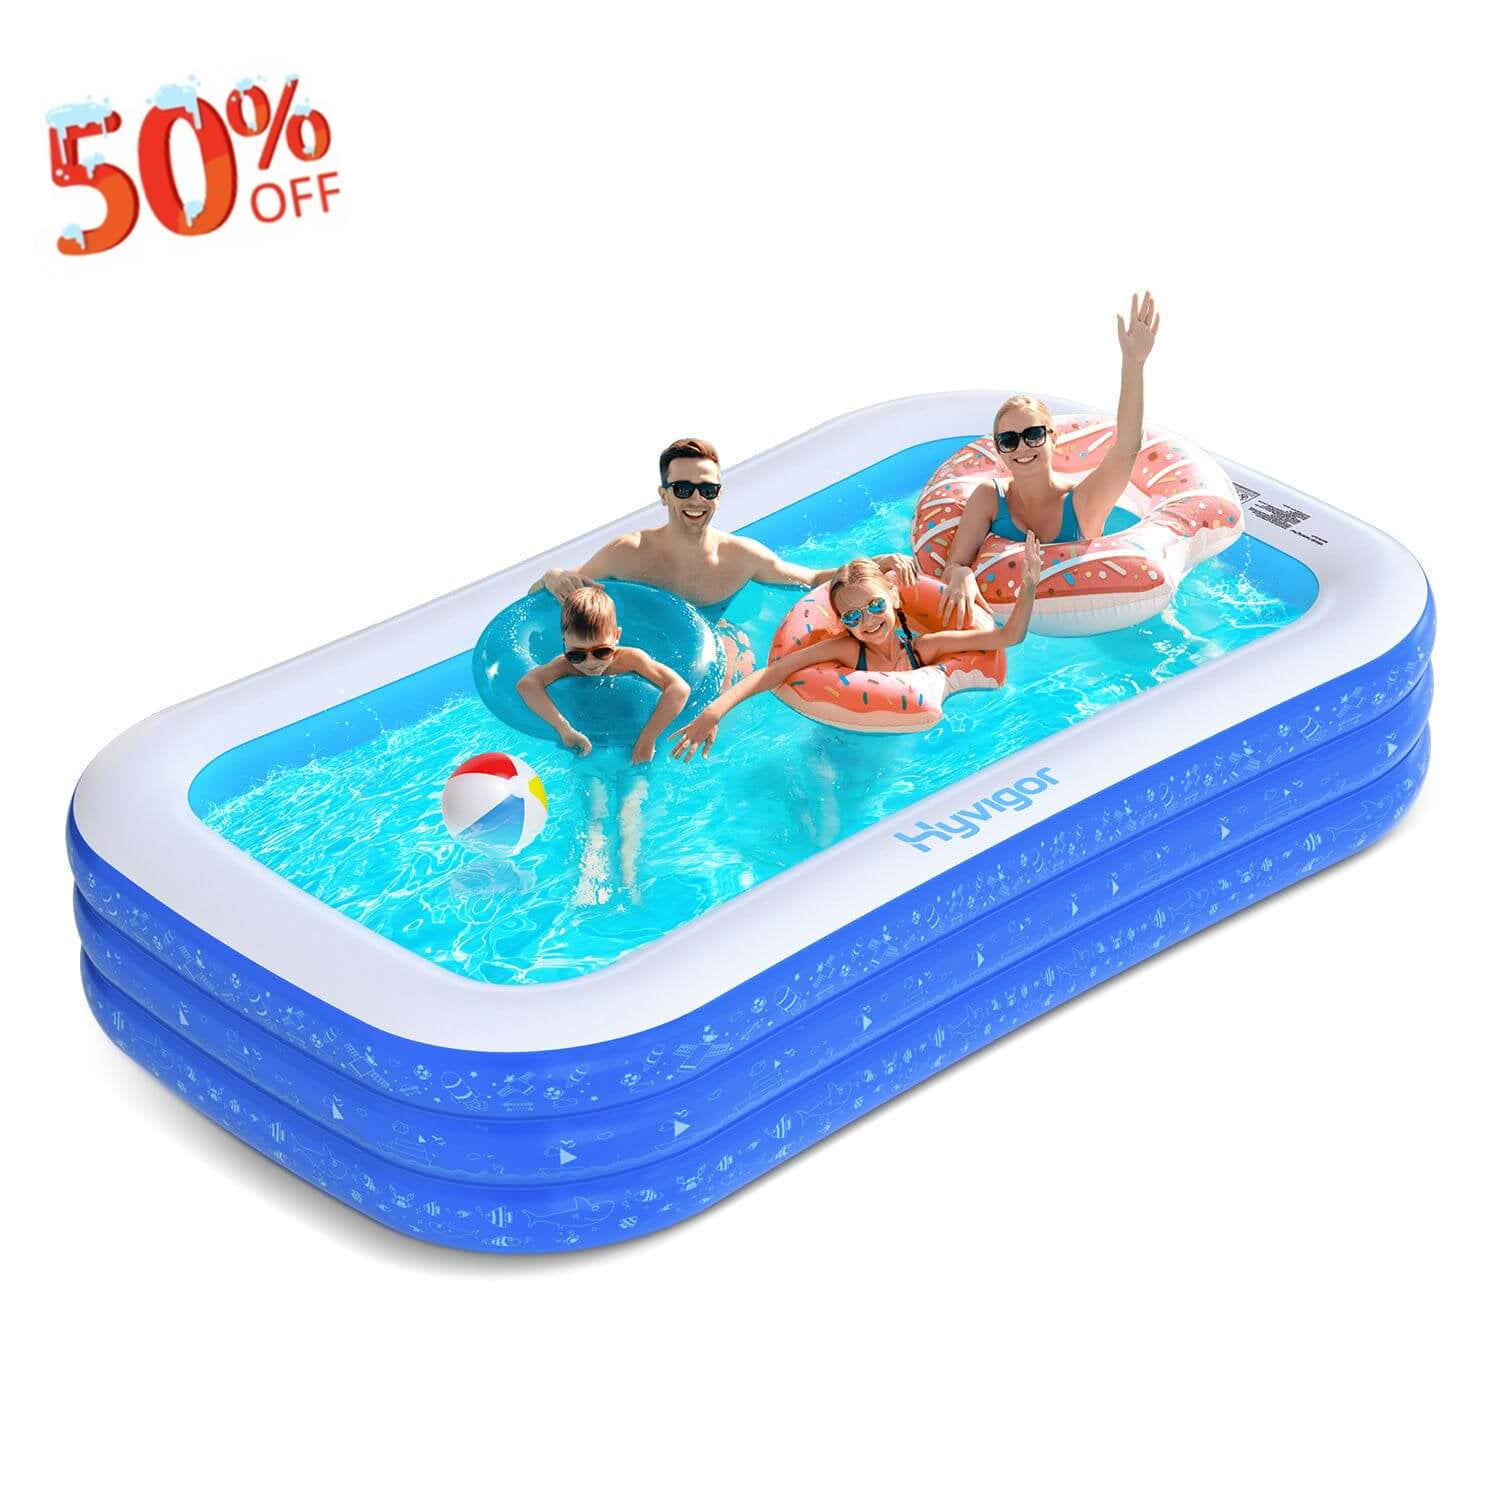 Inflatable Sand Tray Plastic Table Children Kids Indoor Playing Sand Clay ToysQP 